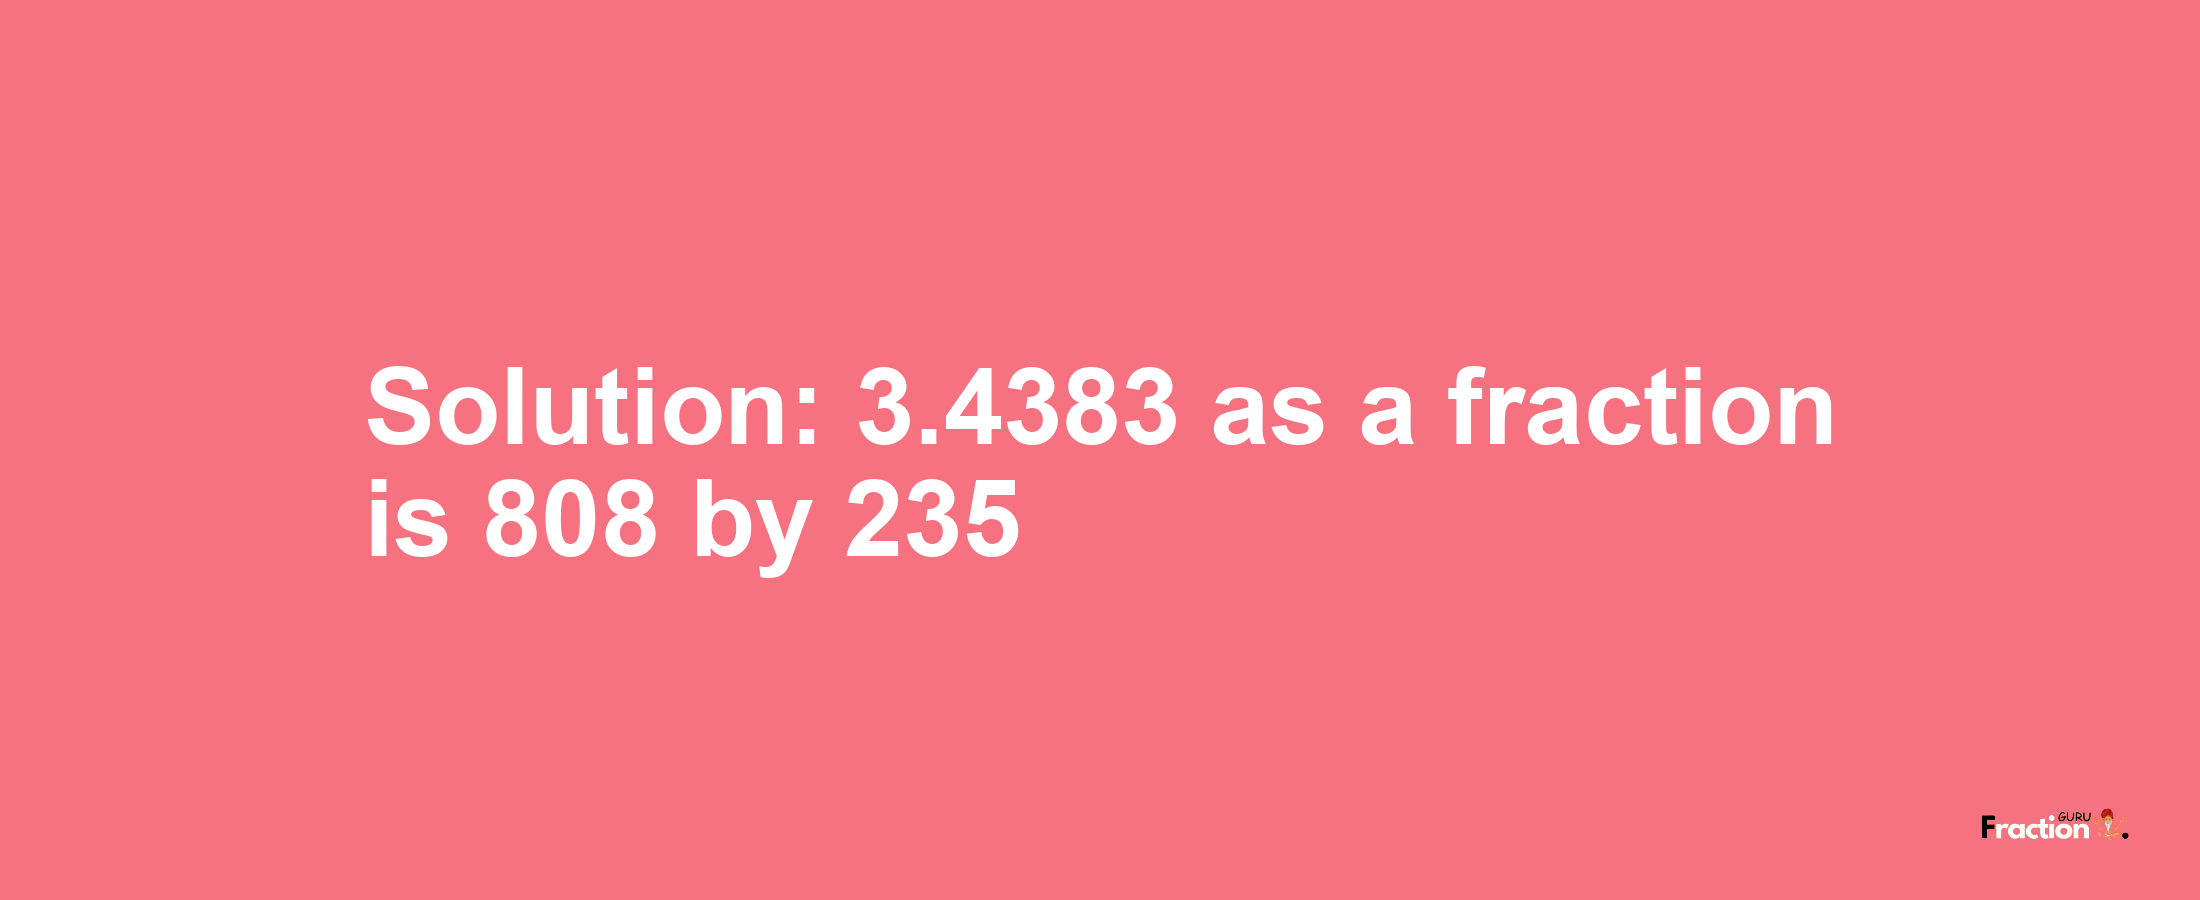 Solution:3.4383 as a fraction is 808/235